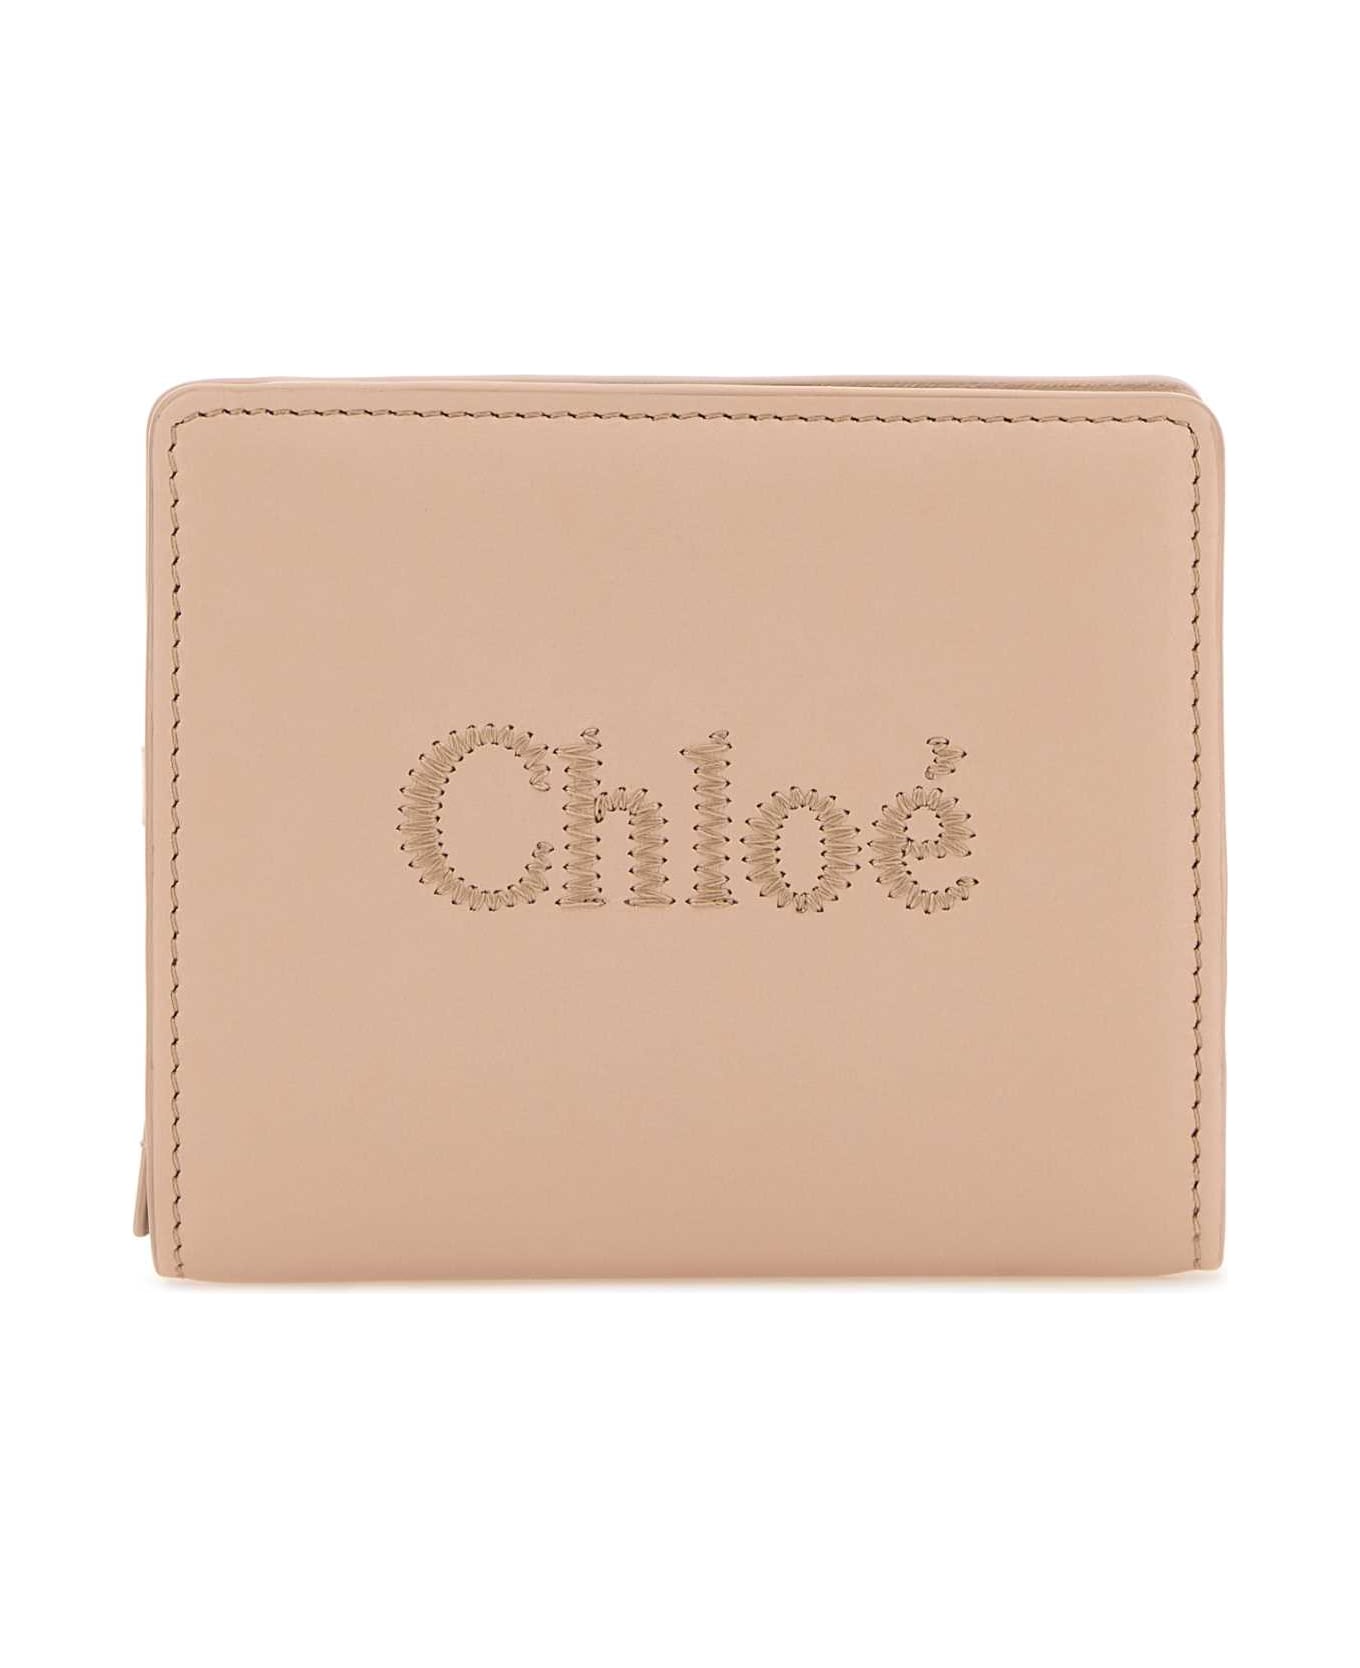 Chloé Skin Pink Leather Wallet - CEMENTPINK